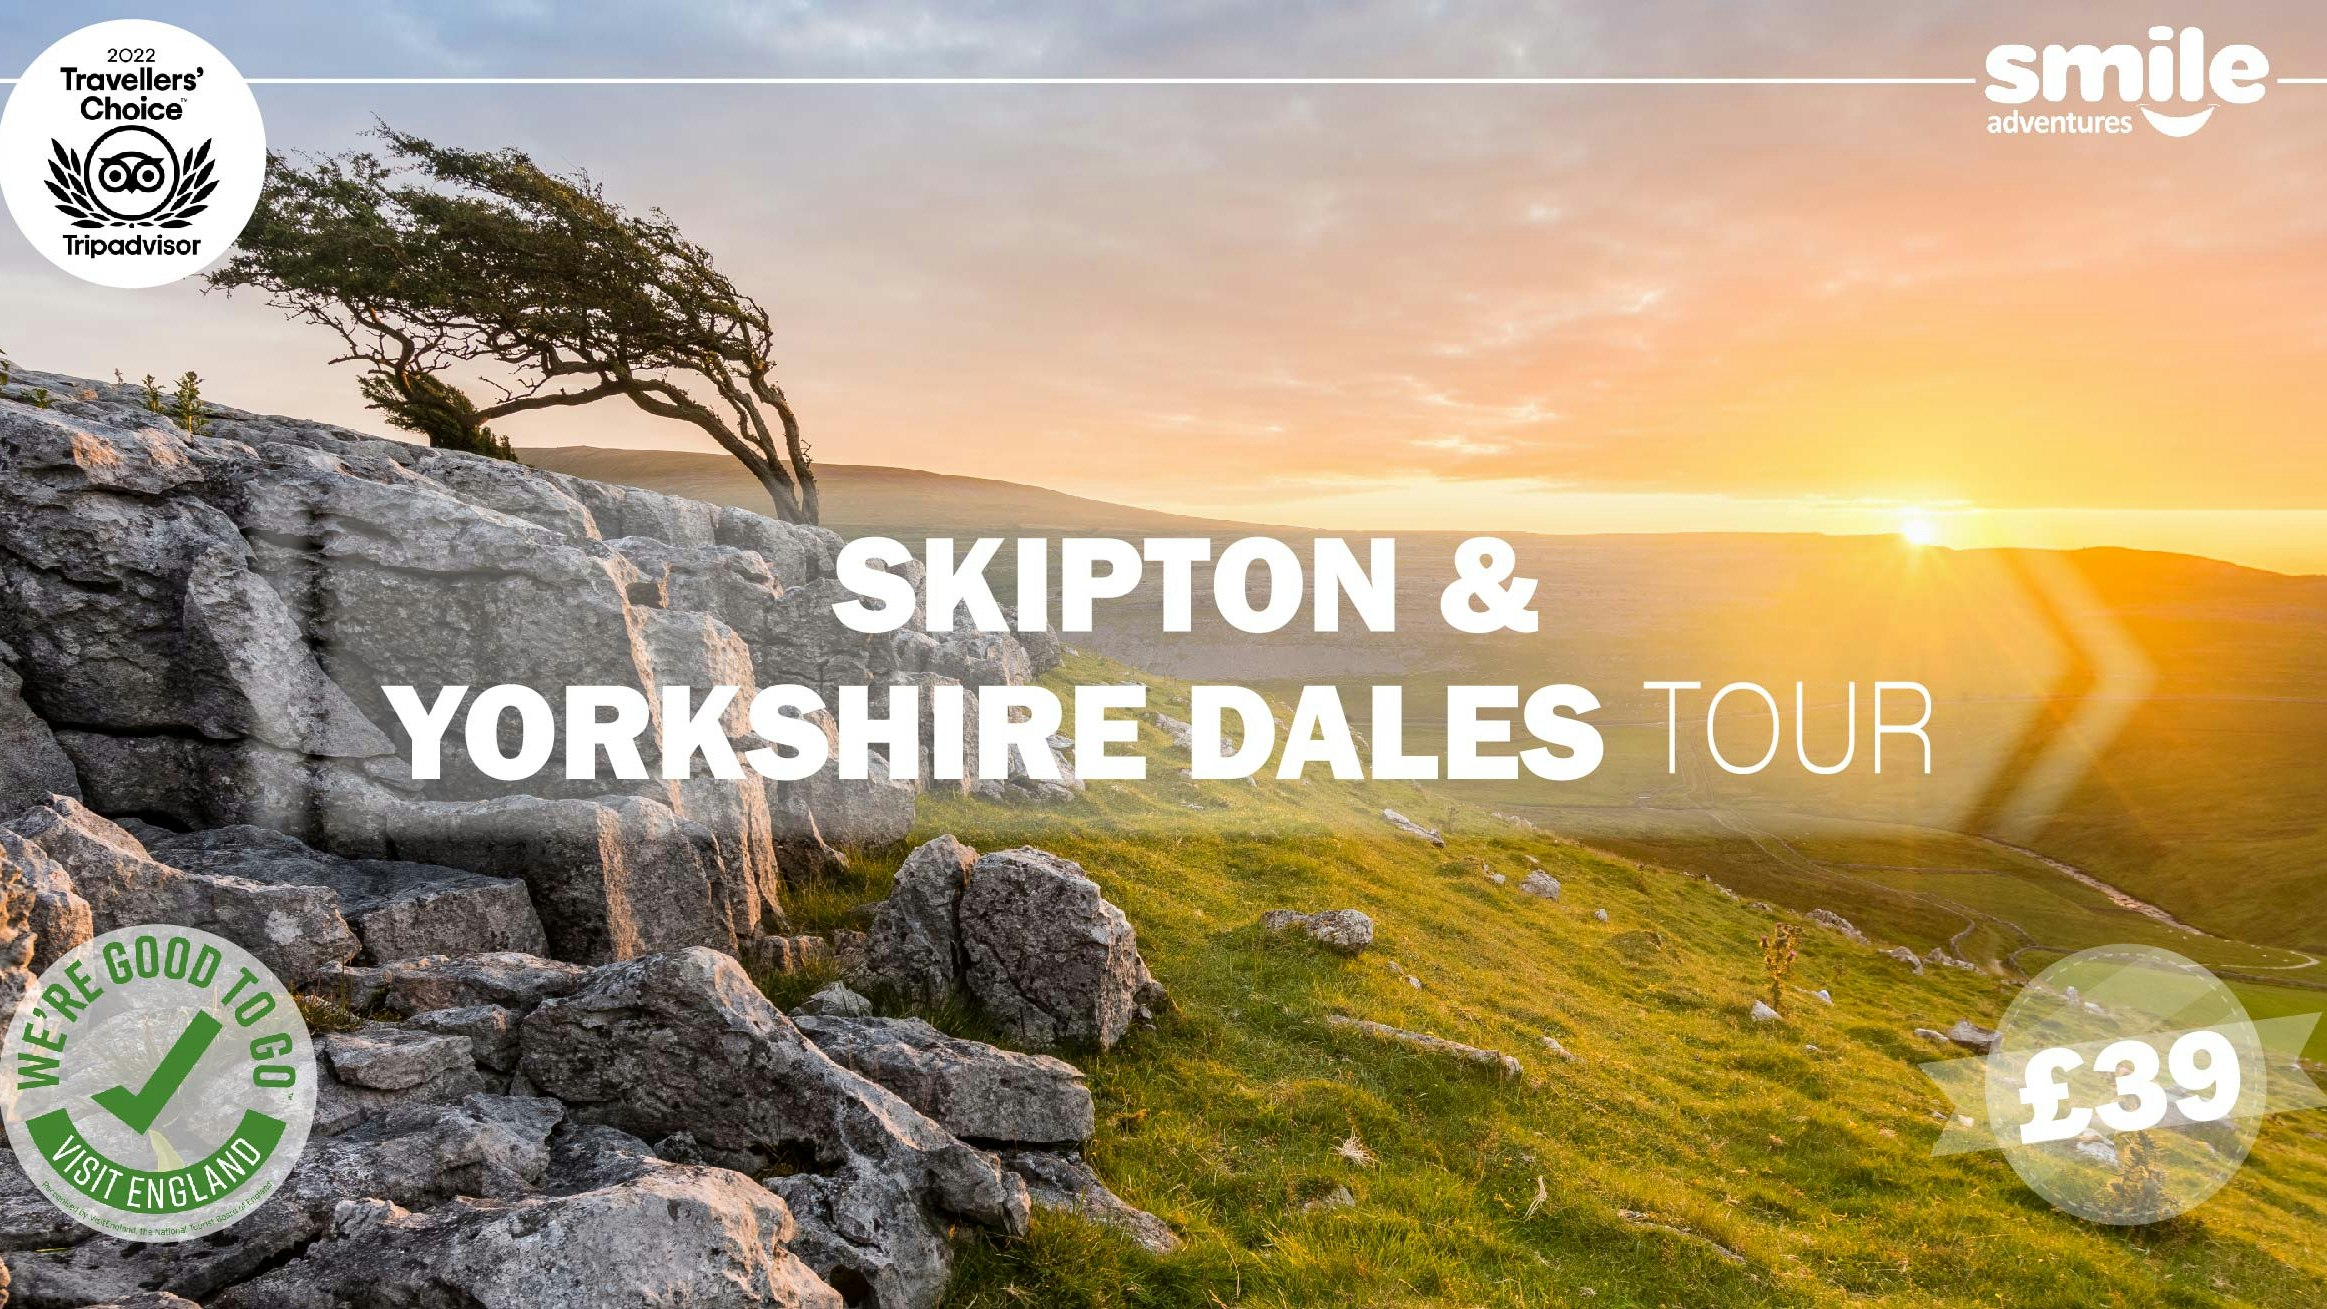 Skipton & Yorkshire Dales Tour – From Manchester